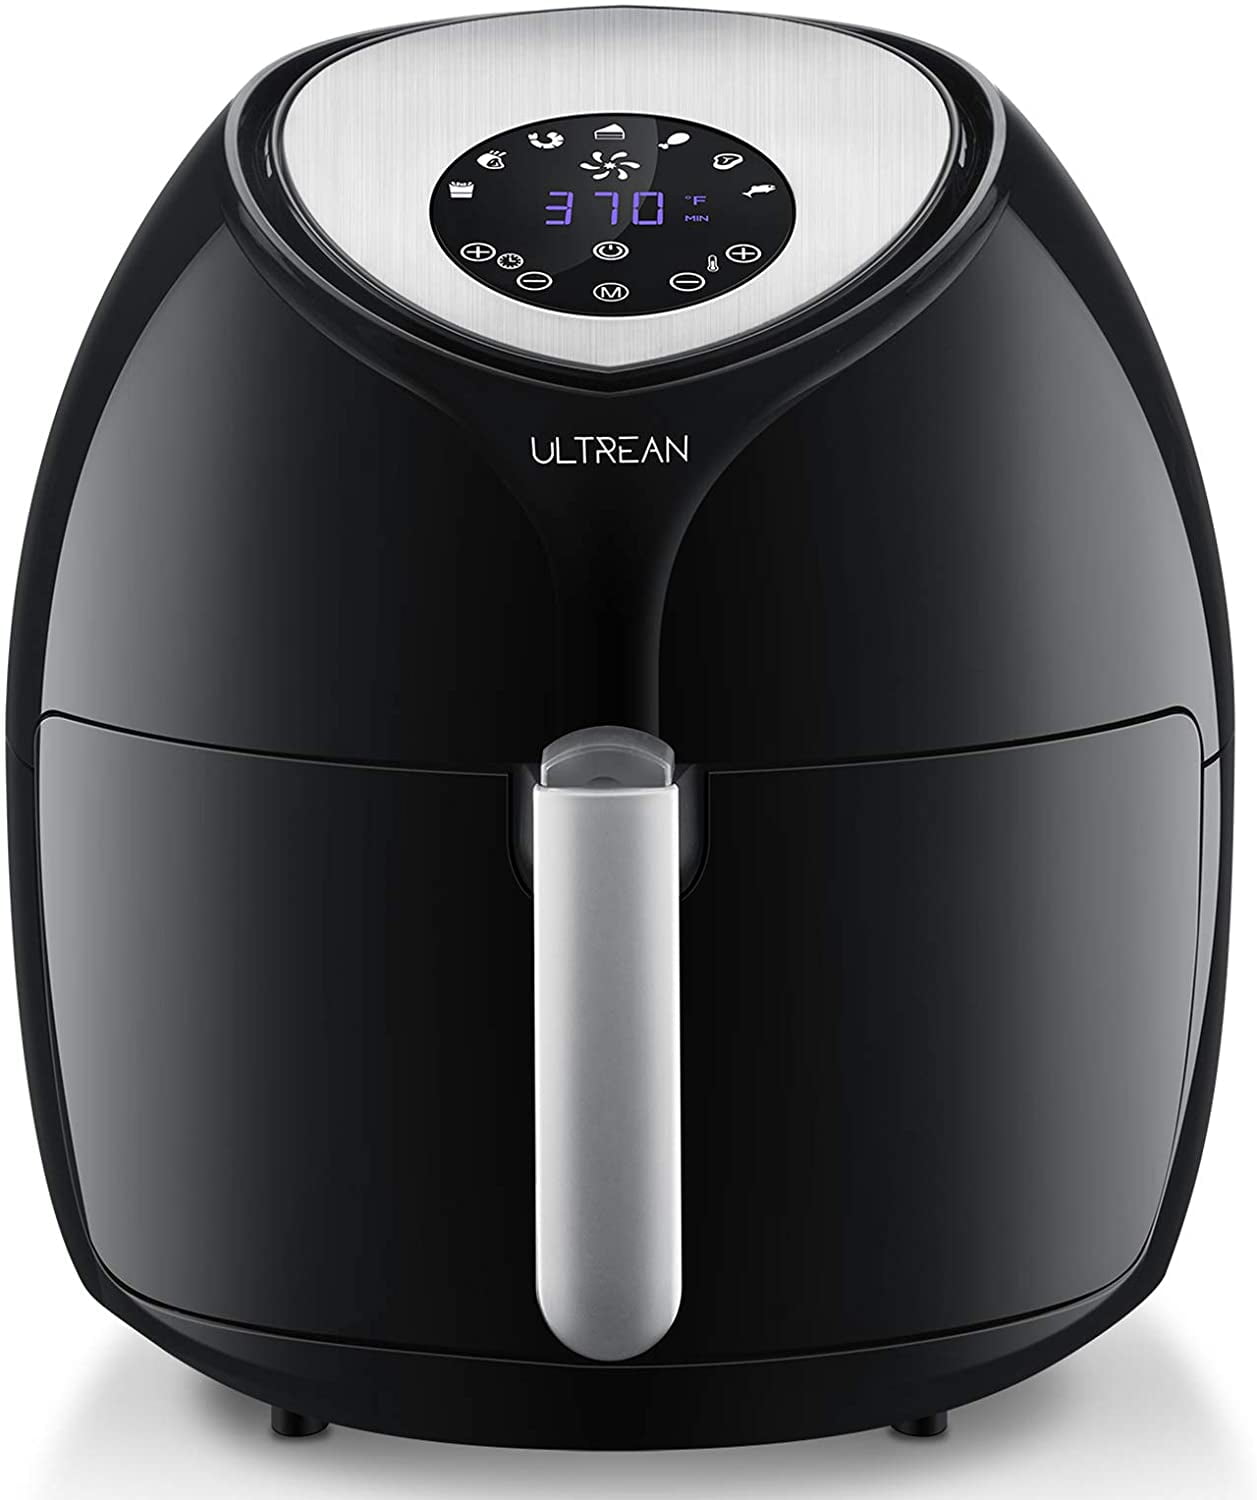 Ultrean Air Fryer, 9 Quart 6-in-1 Electric Hot XL Airfryer Oven Oilless Cooker, Large Family Size LCD Touch Control Panel and Nonstick Basket, ETL